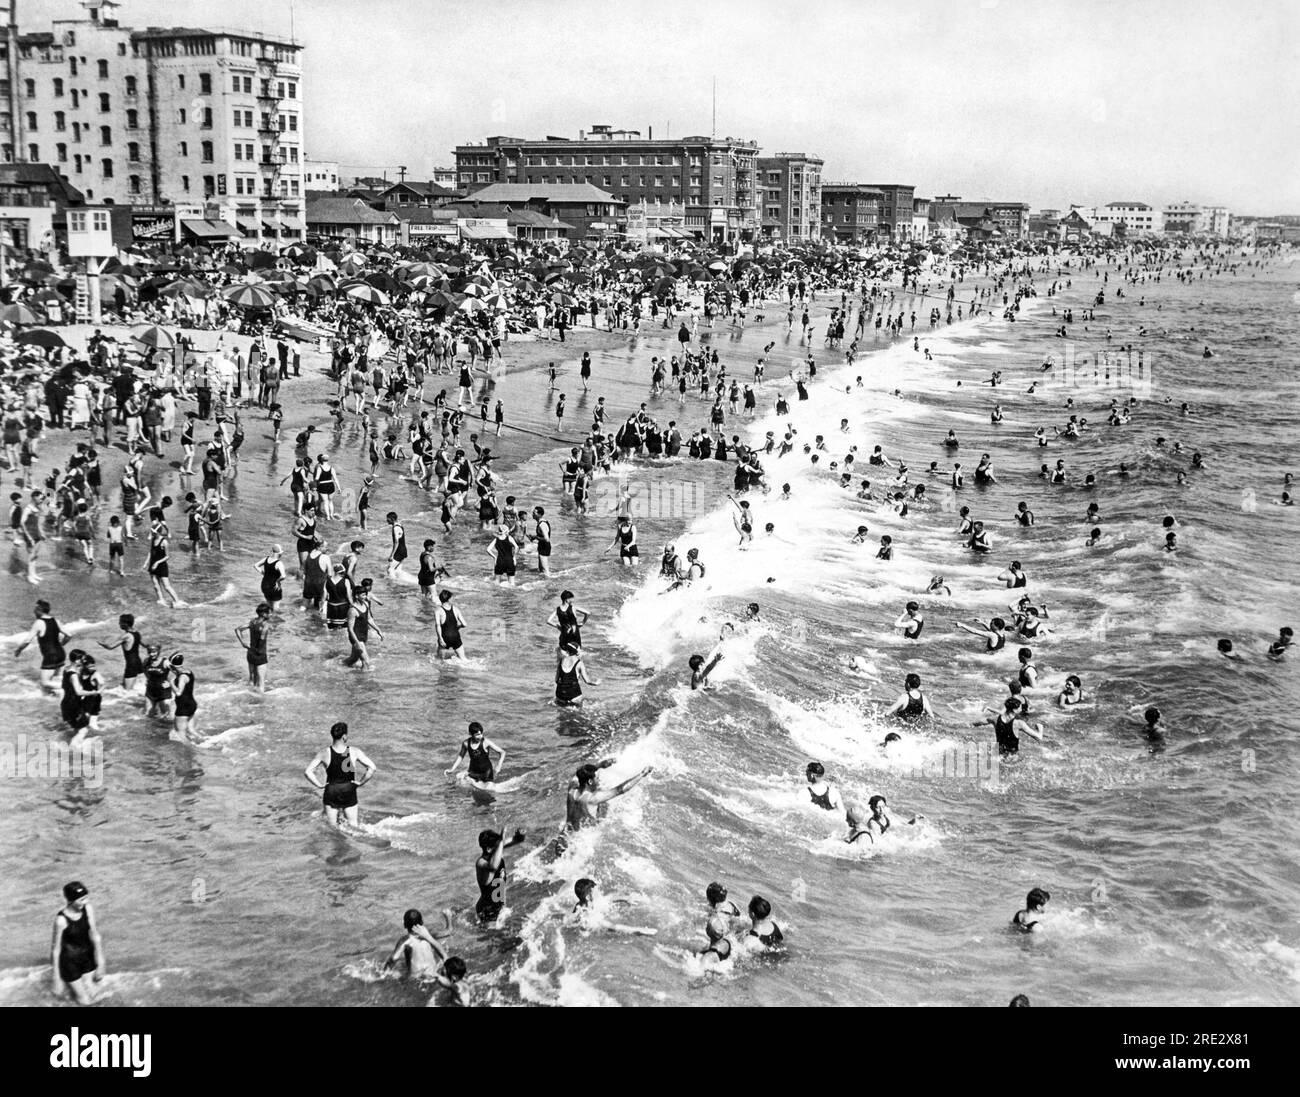 Santa Monica, California:    December, 1923. Crowds of Sunday bathers enjoying the warm December waters of the Pacific shore at Ocean Park Beach in Santa Monica. Stock Photo